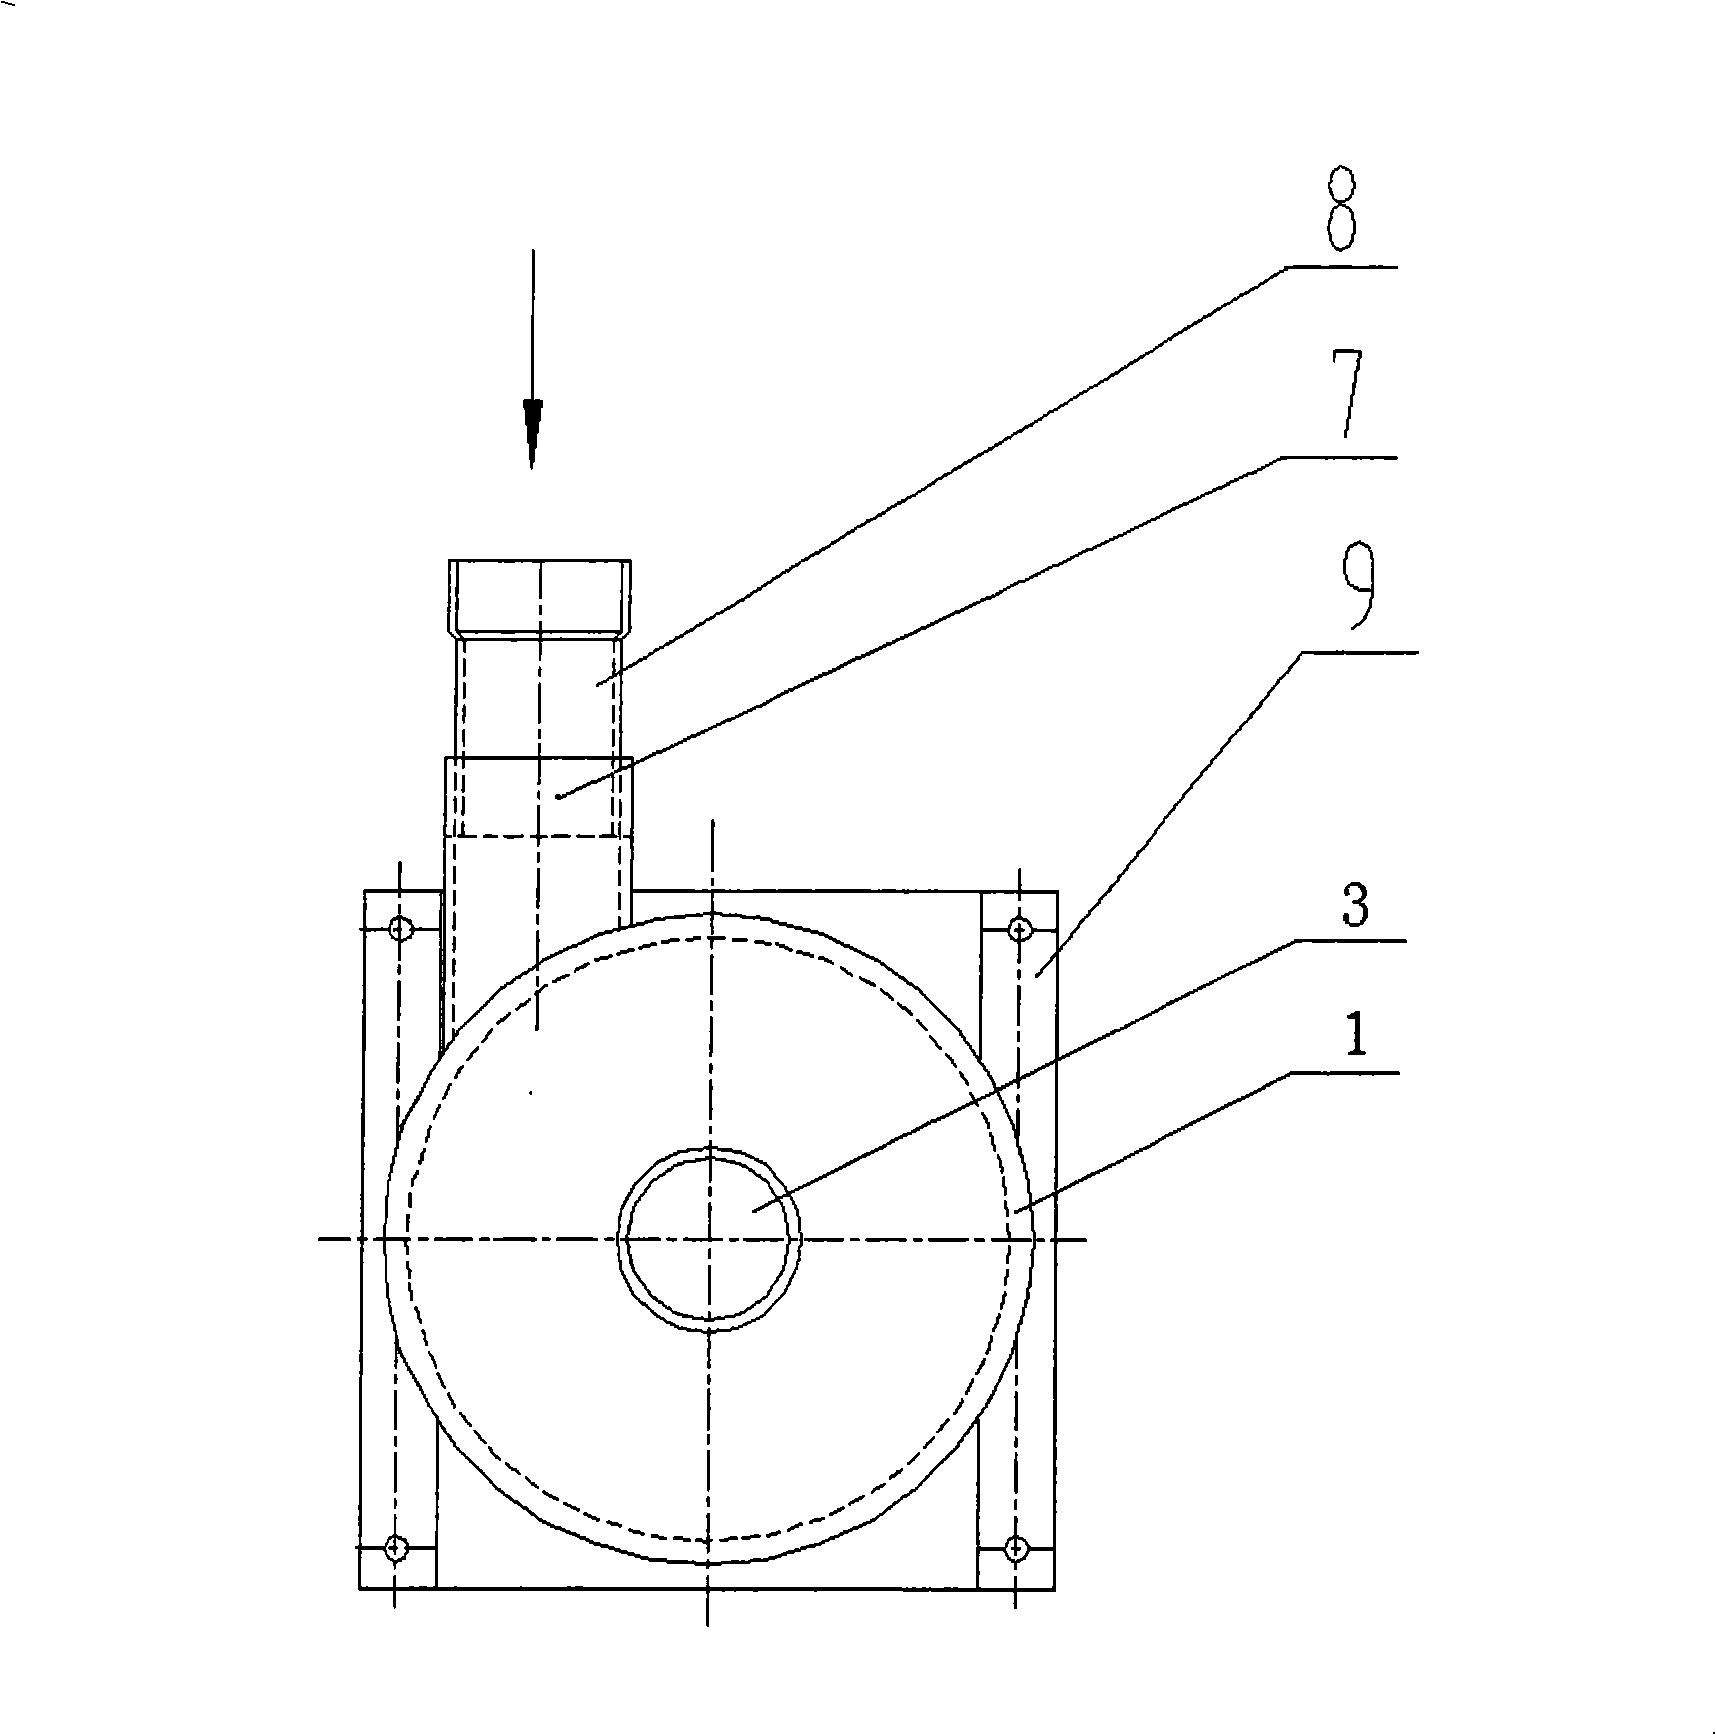 Gas-liquid separator for heat pump scavenging oil using siphon mode